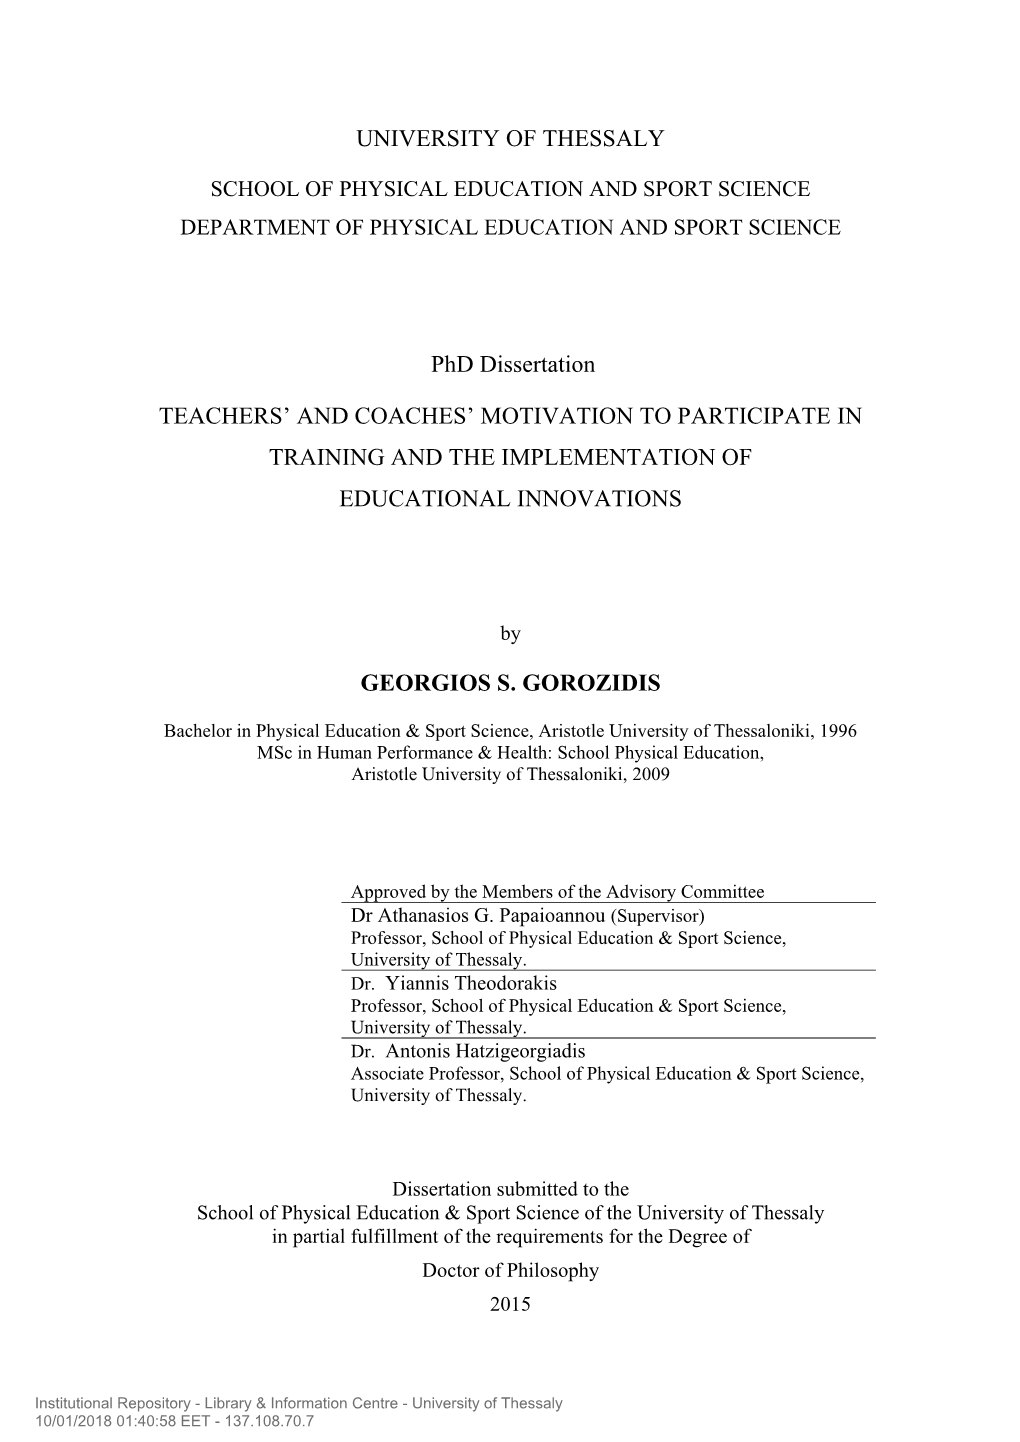 UNIVERSITY of THESSALY Phd Dissertation TEACHERS' AND